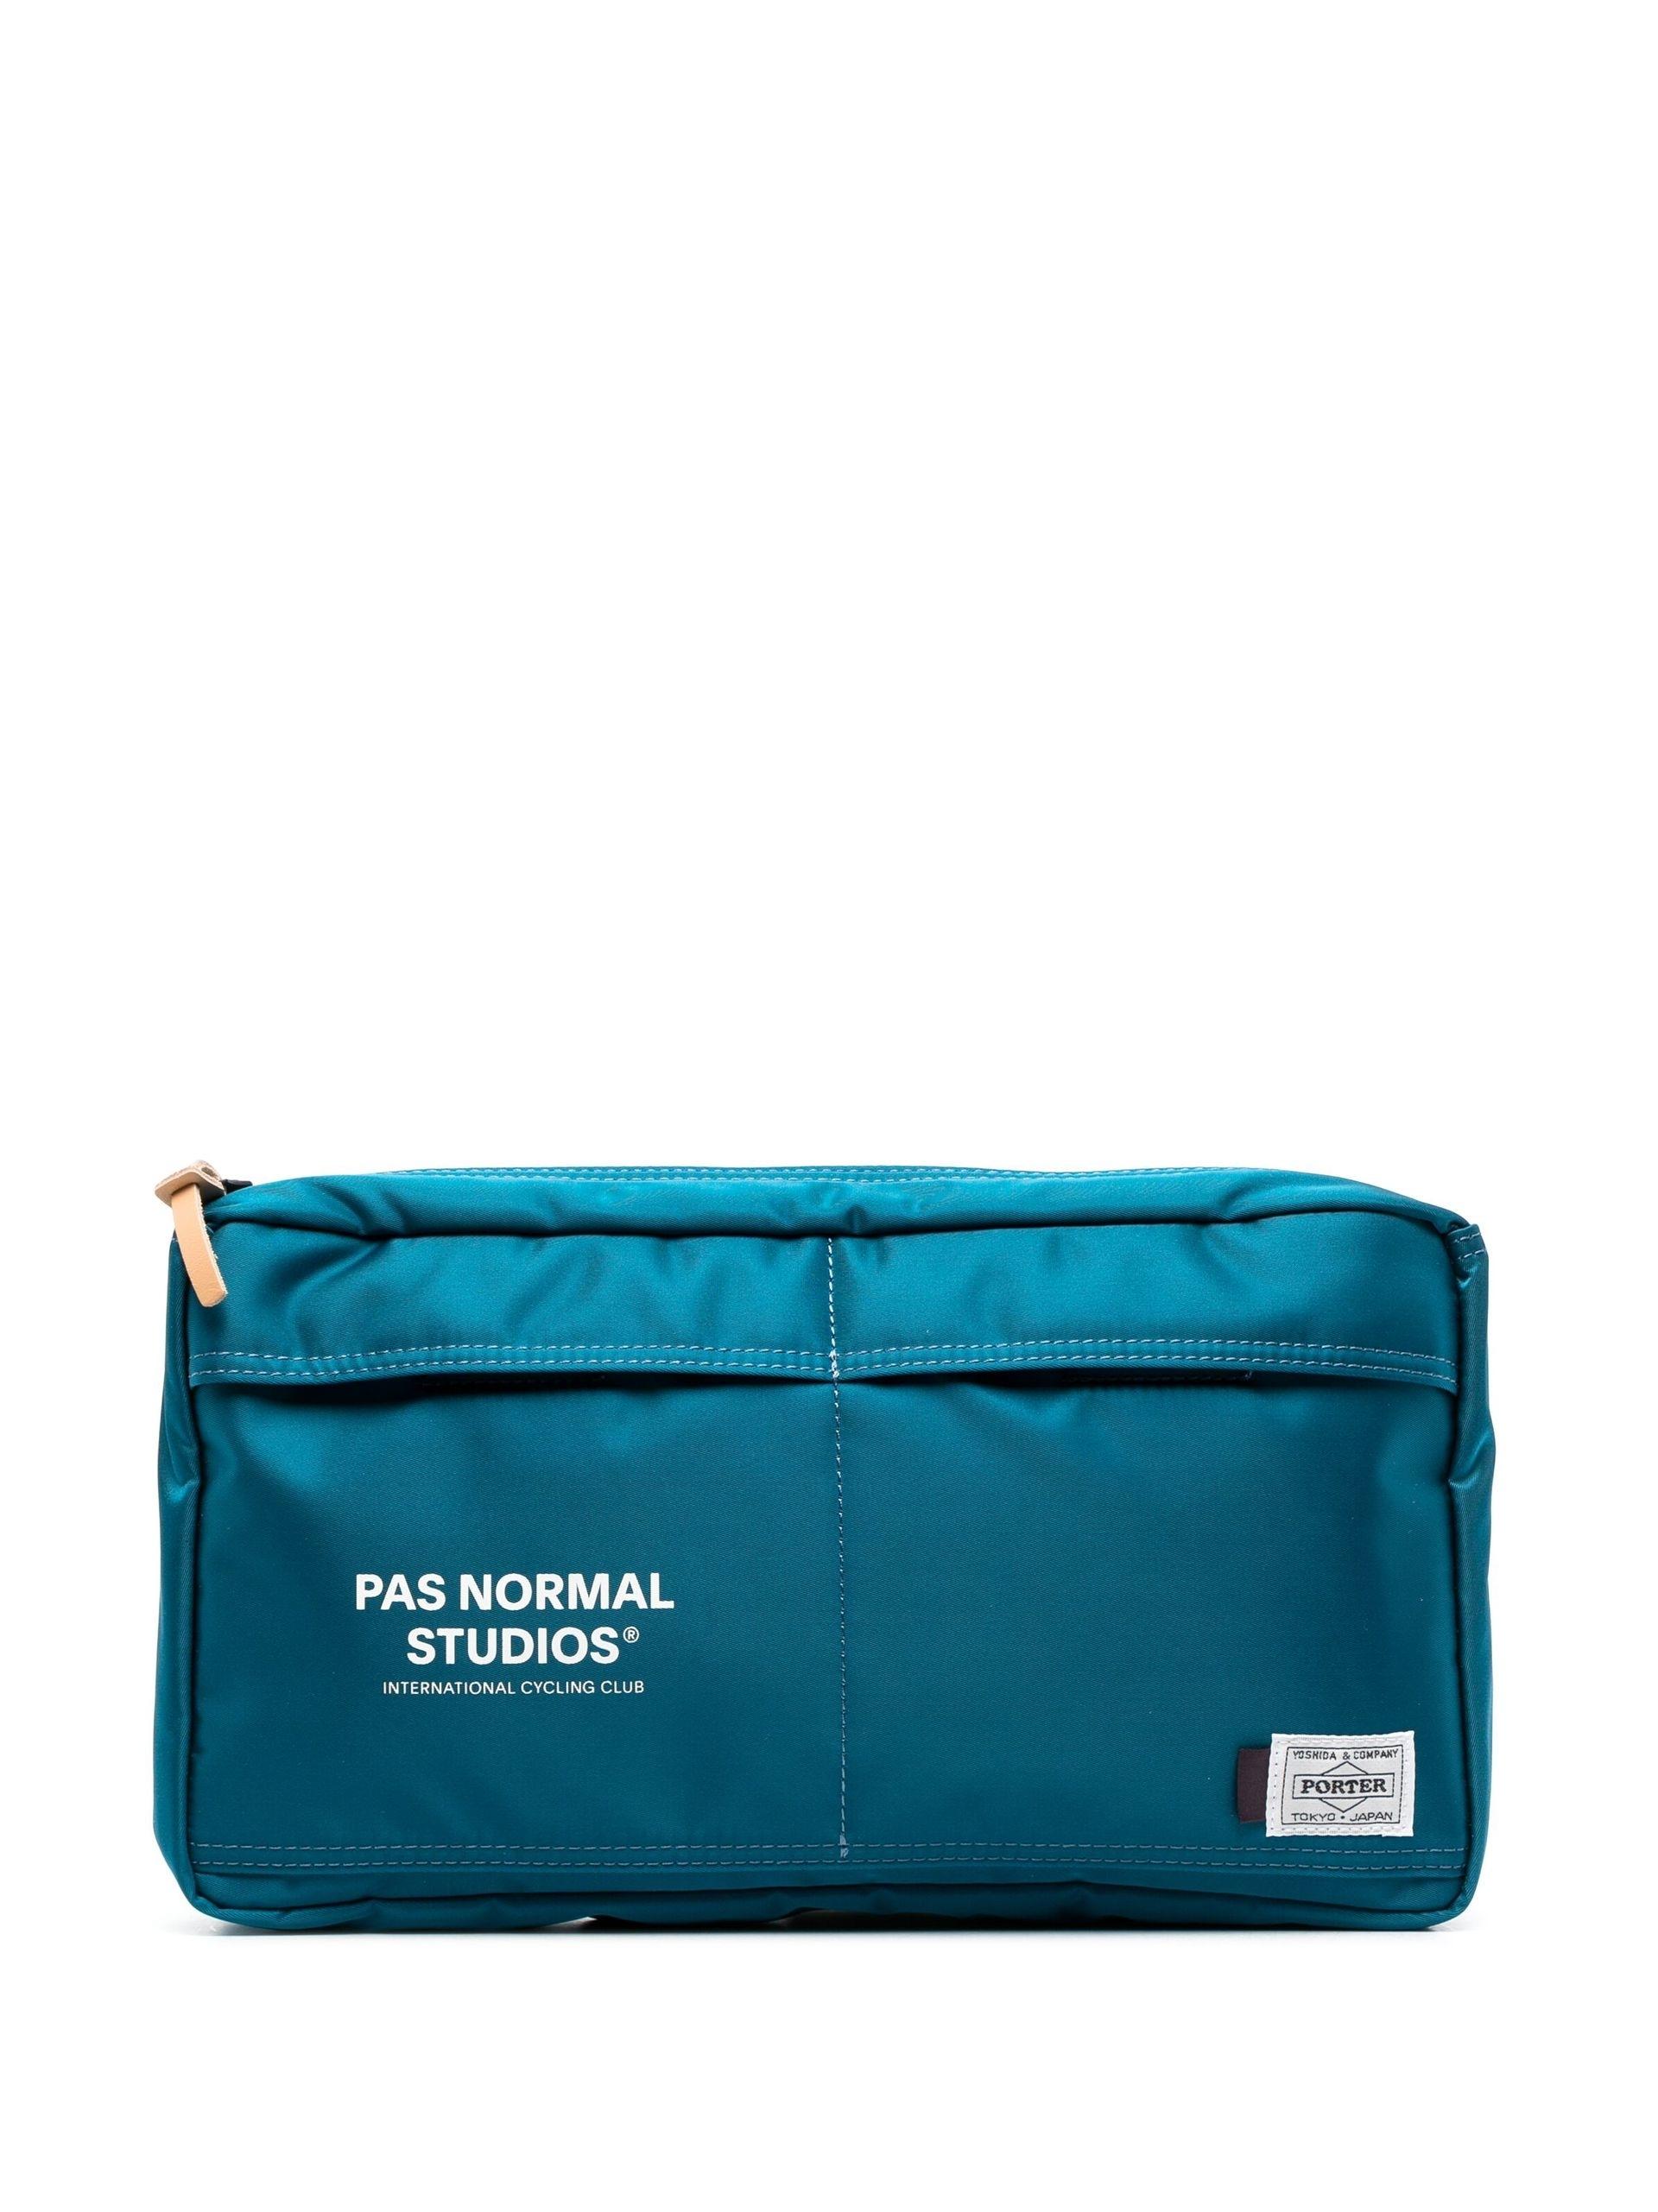 Men's Porter-Yoshida and Co Belt Bags, waist bags and fanny packs from $177